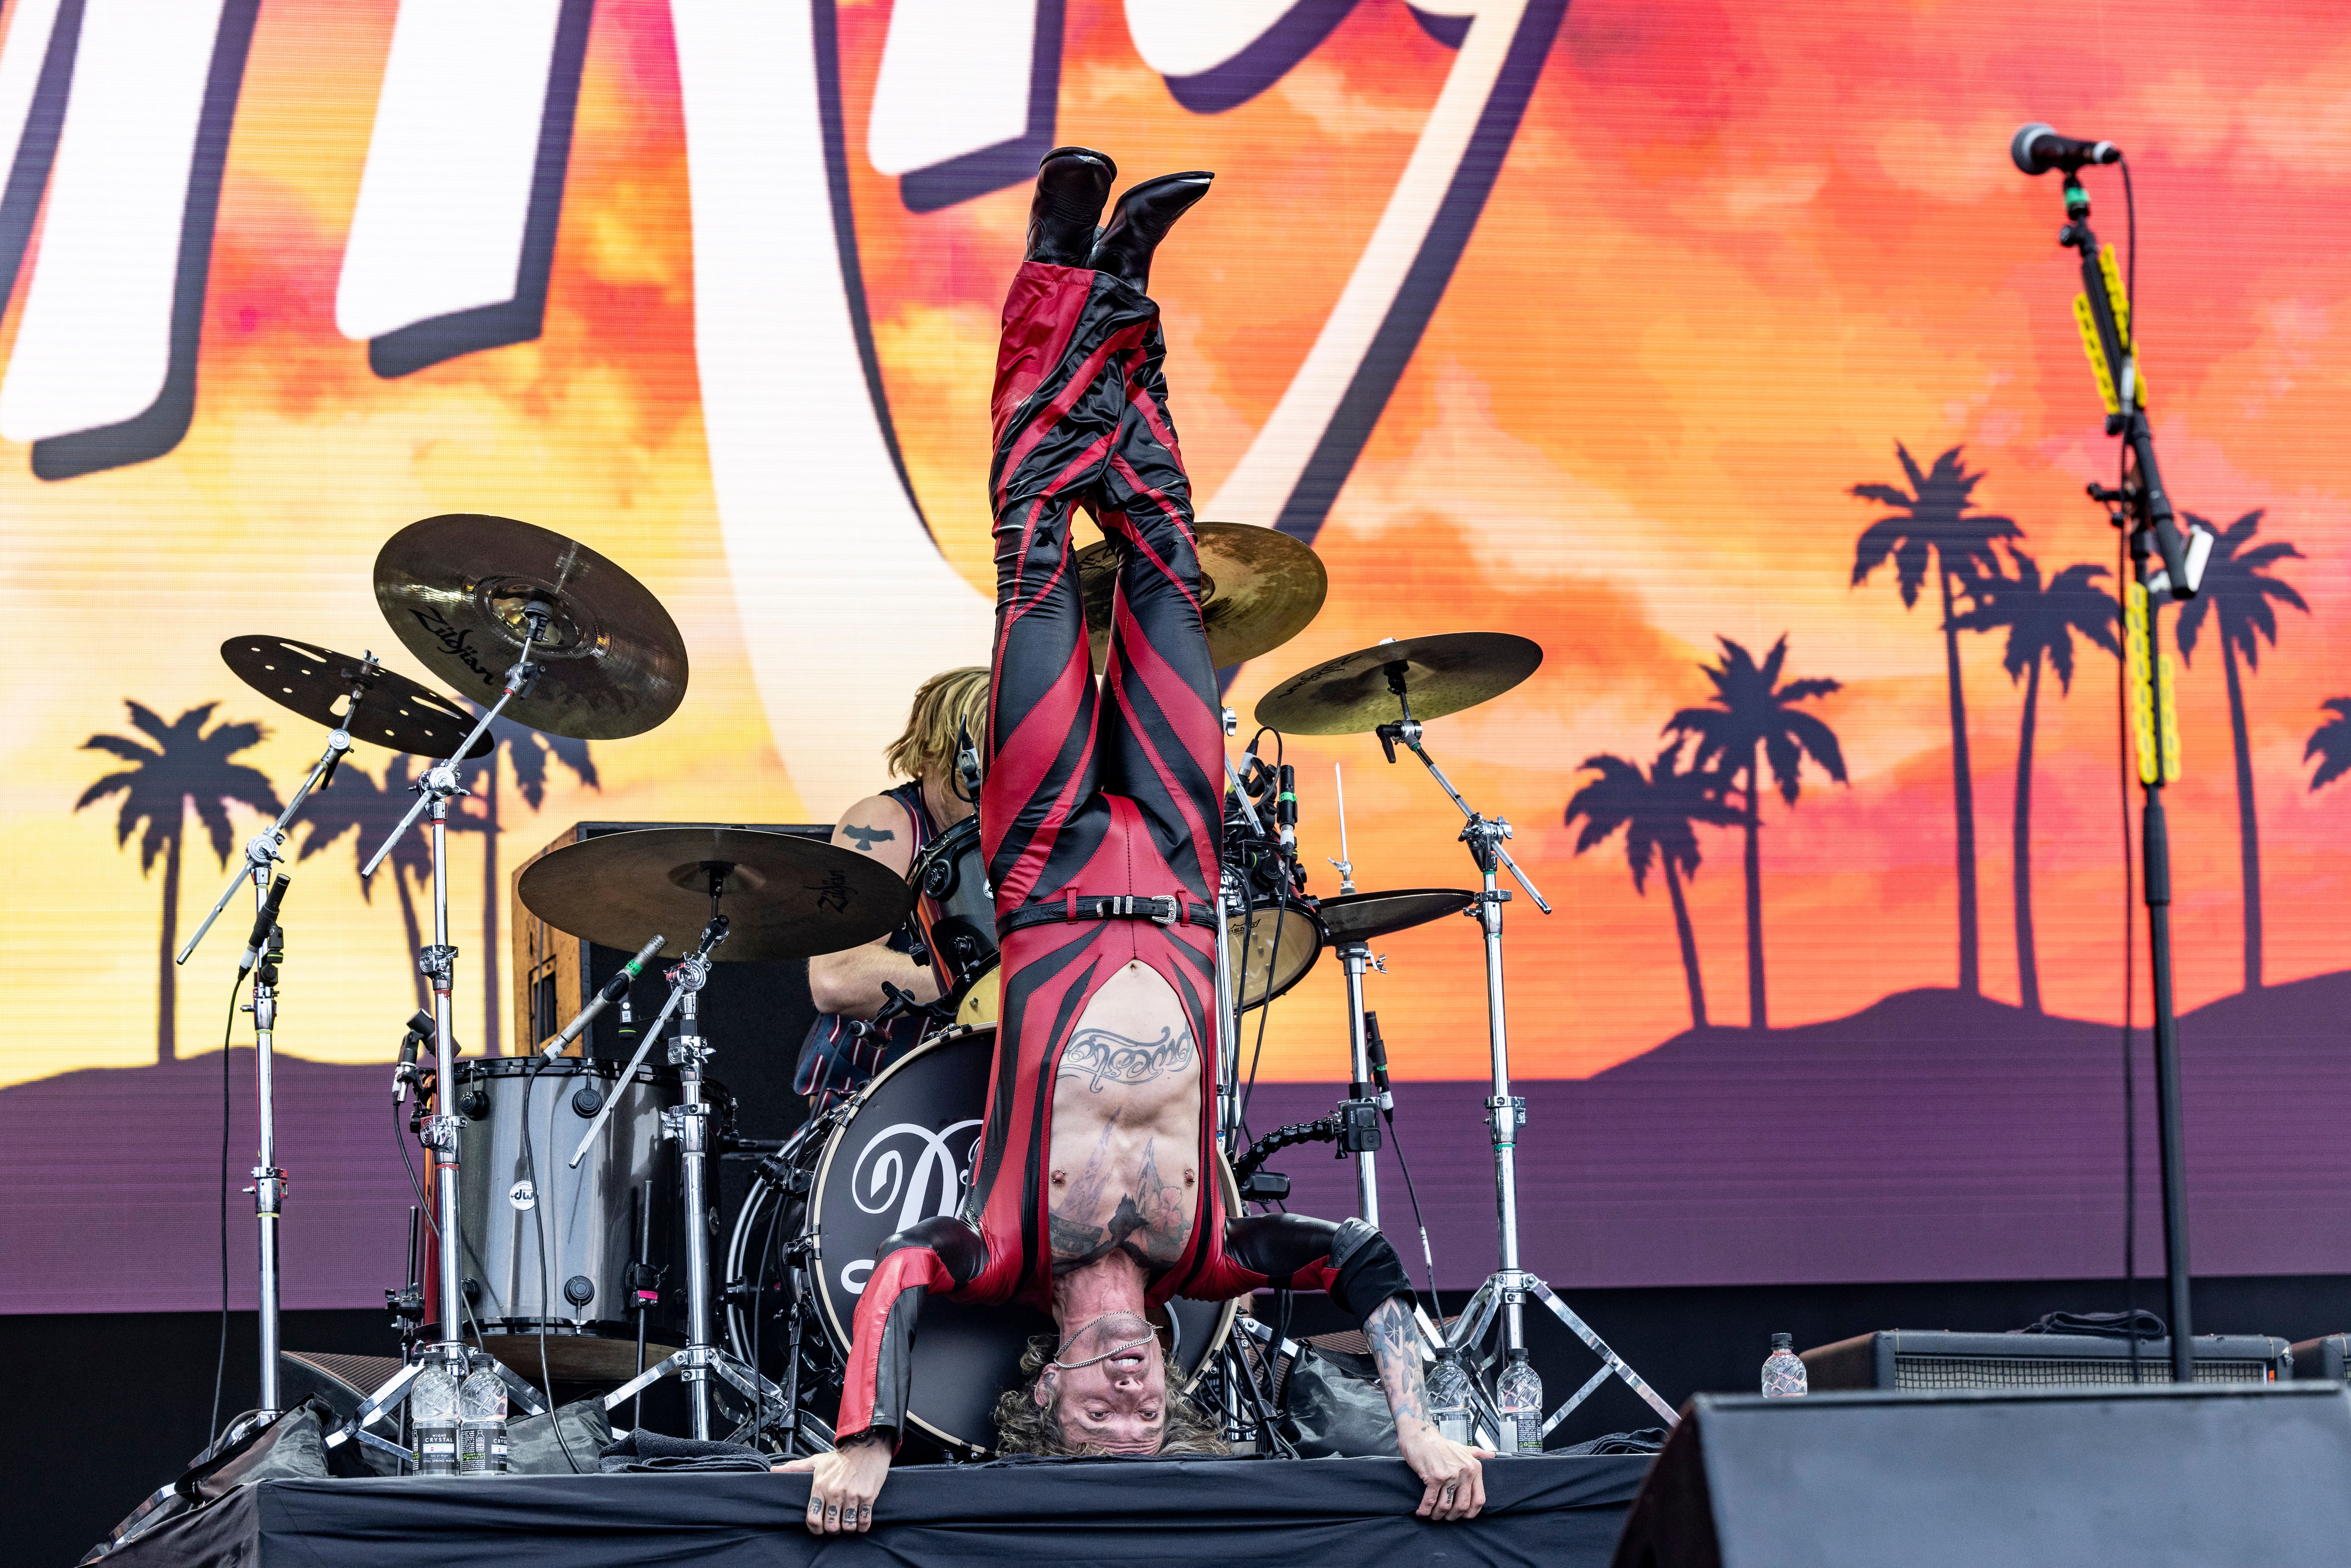 The Darkness frontman Justin Hawkins performed a headstand on stage